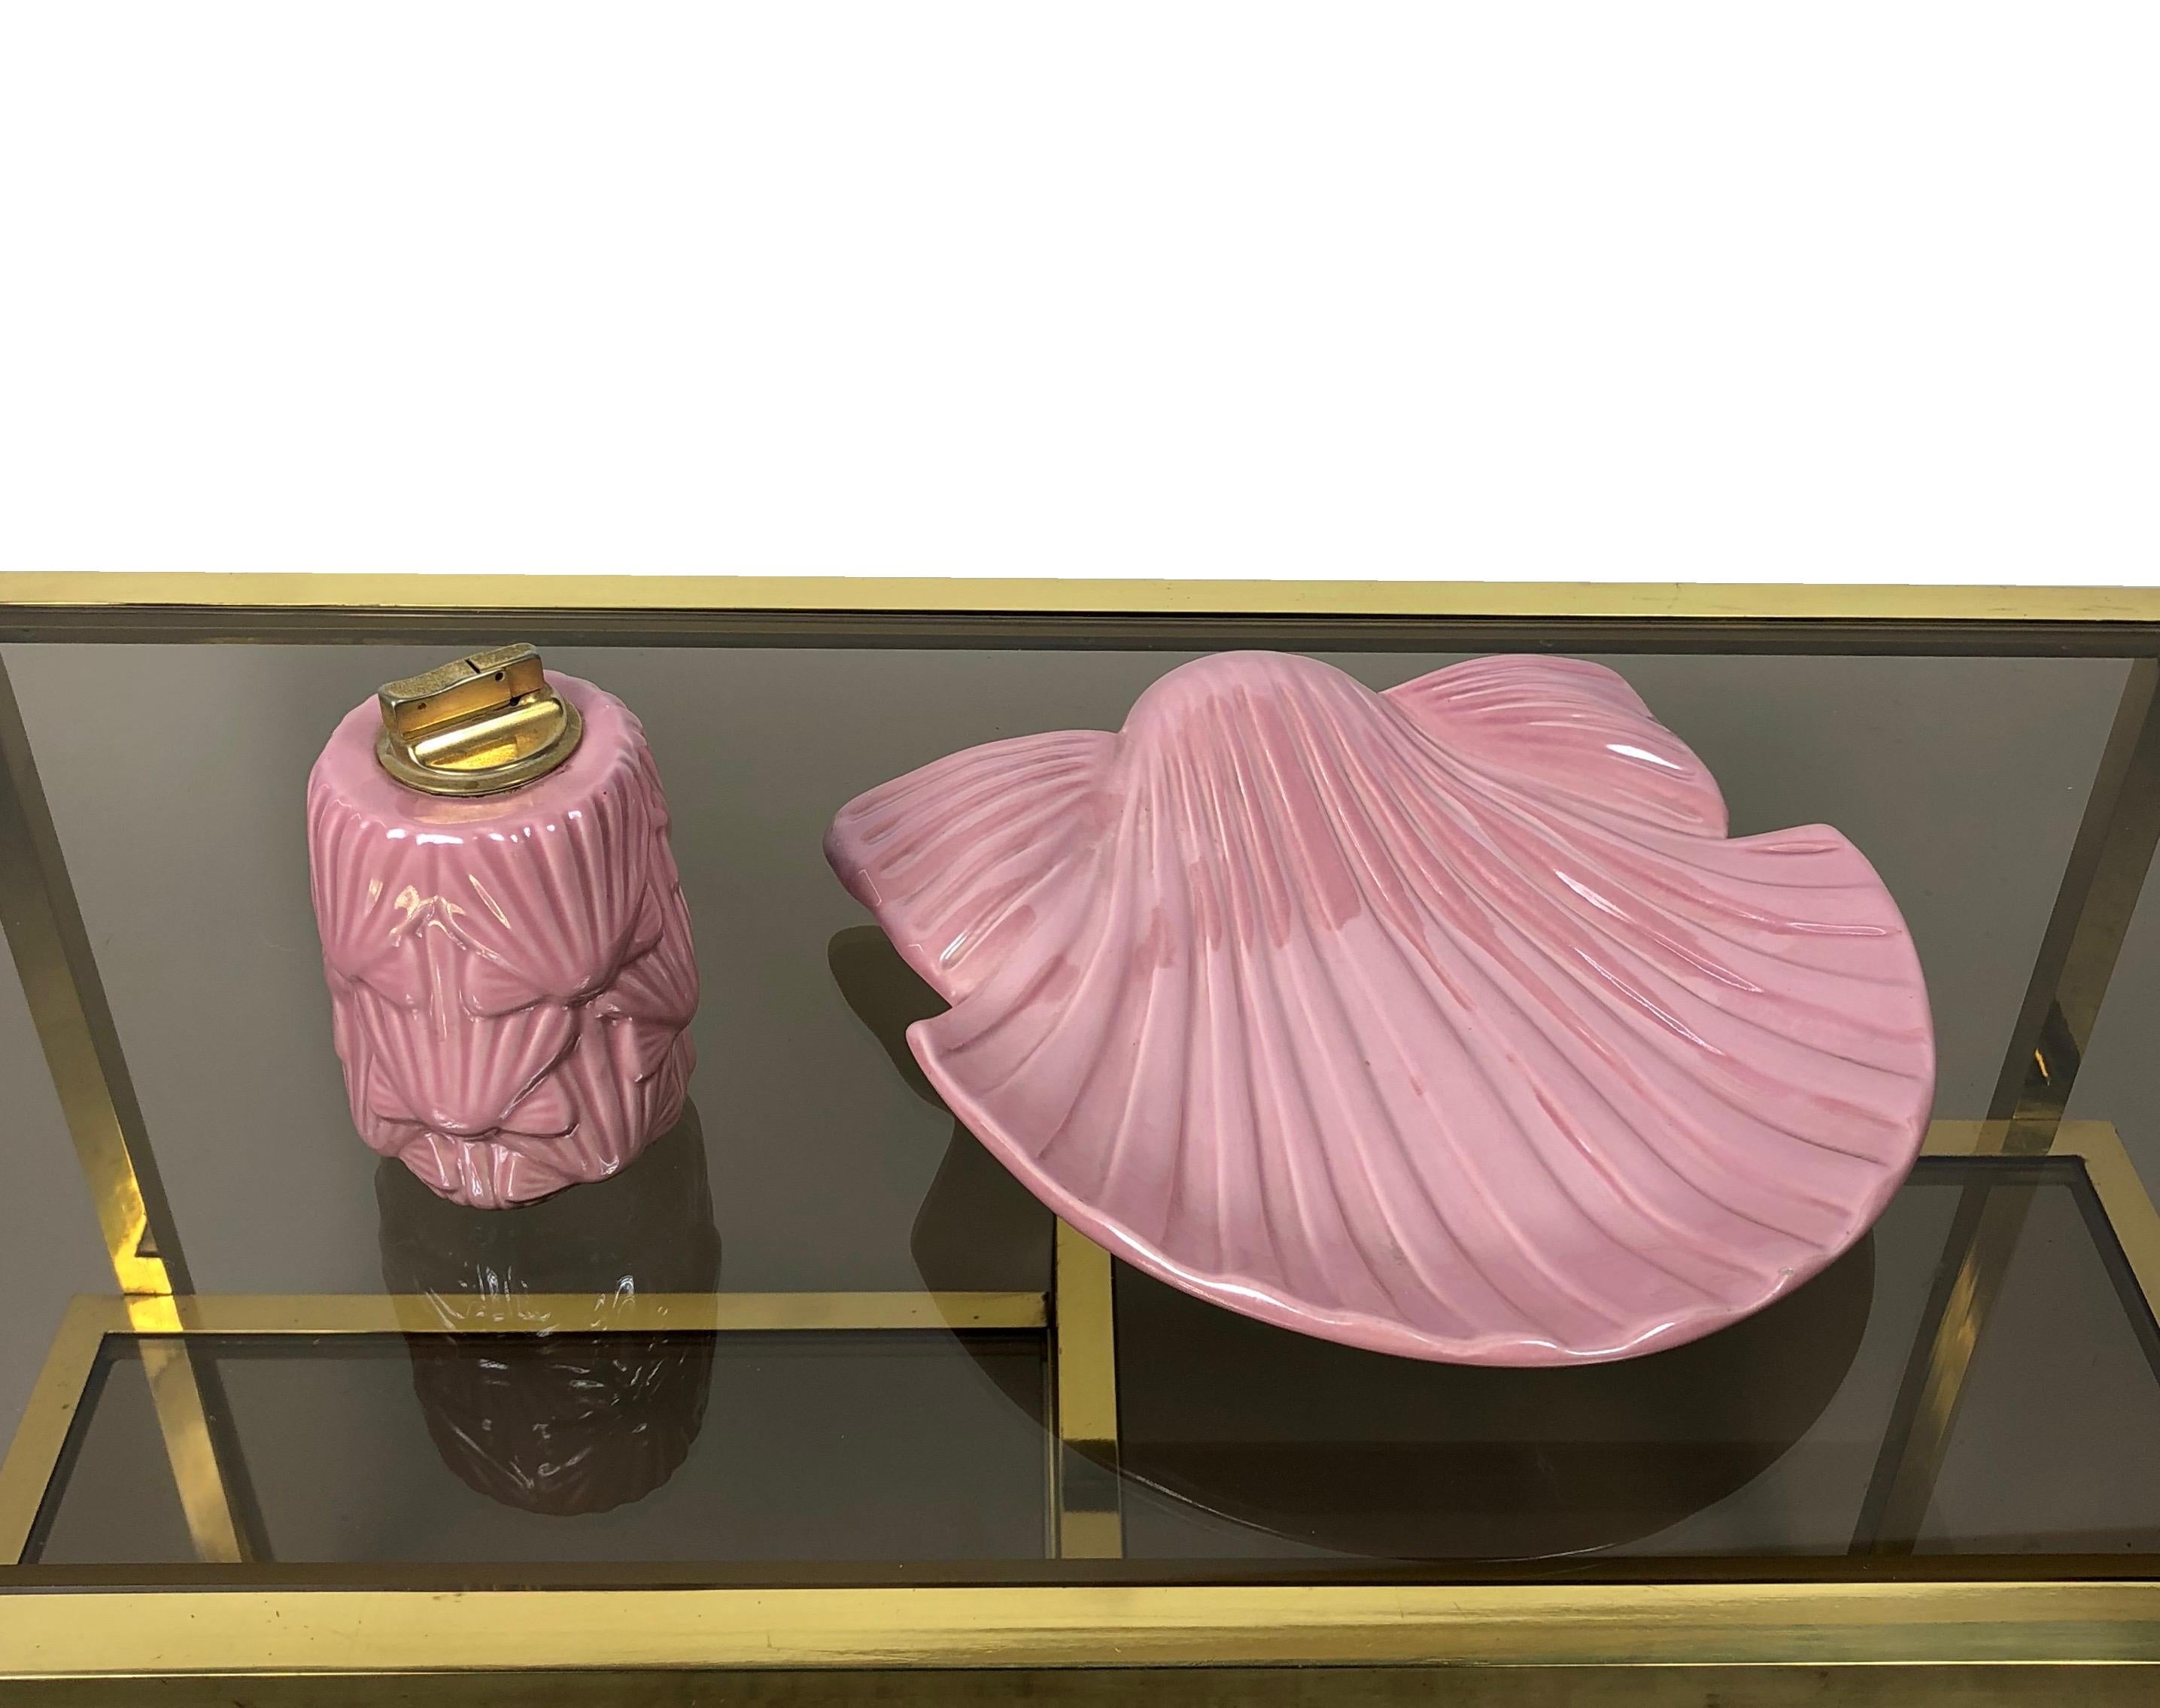 Rare set of pink ceramic ahstray/pocket empiter in the shape of a seashell and a table lighter that recalls the same seashell theme. They're both signed on the bottom with 